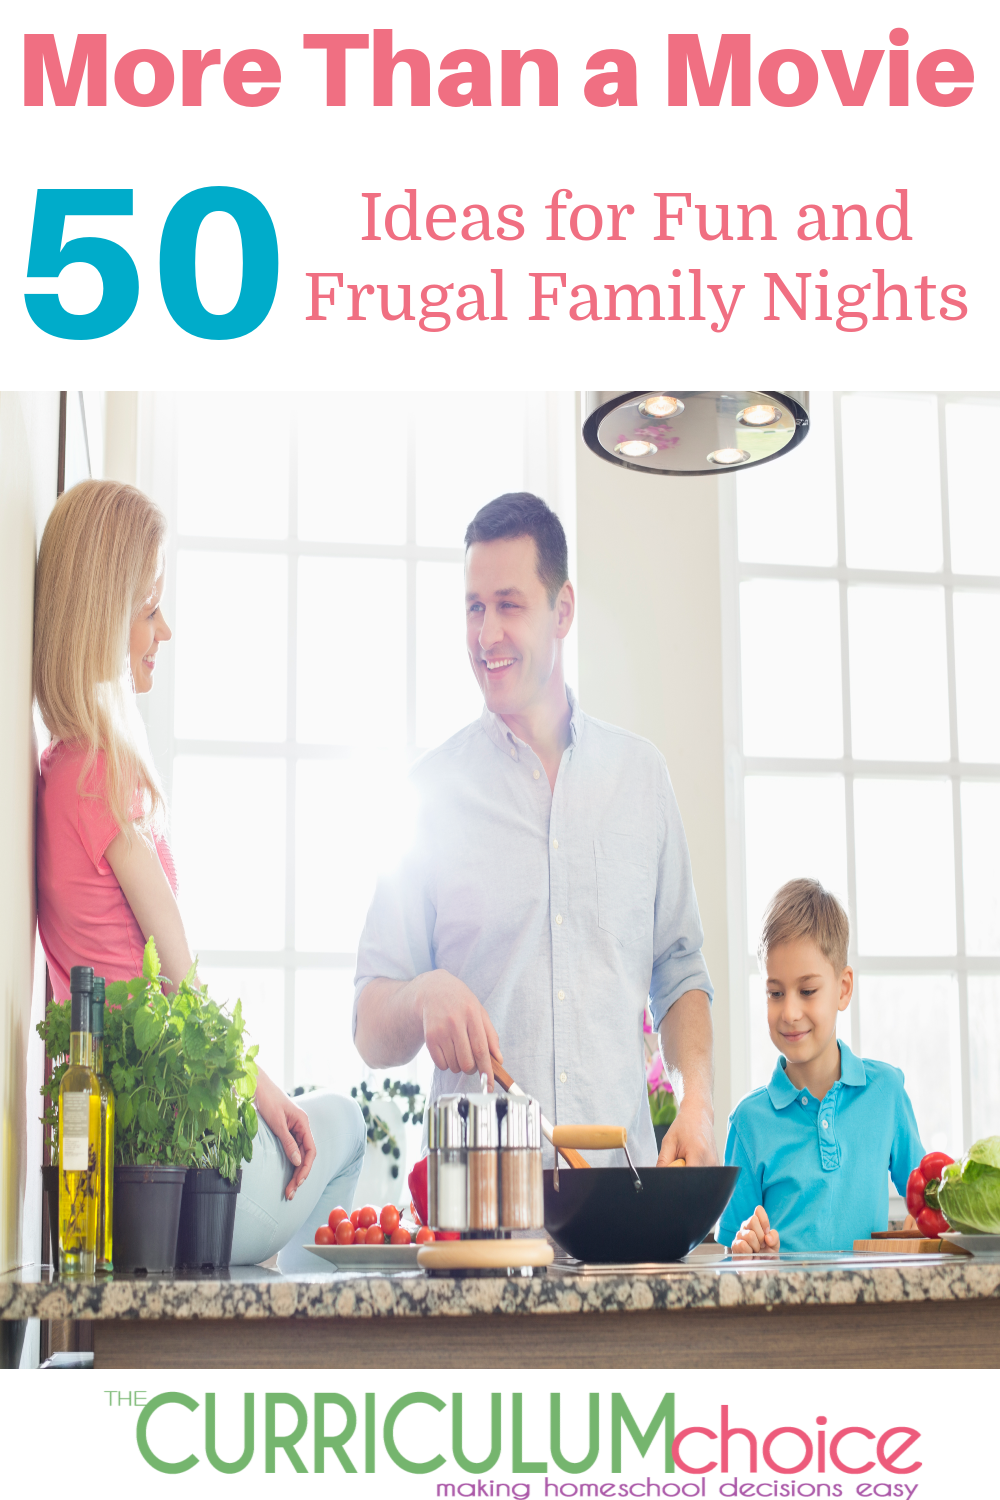 Enjoy screen free, fun, frugal family nights with ideas from More Than A Movie: 50 Ideas for Fun and Frugal Family Nights!